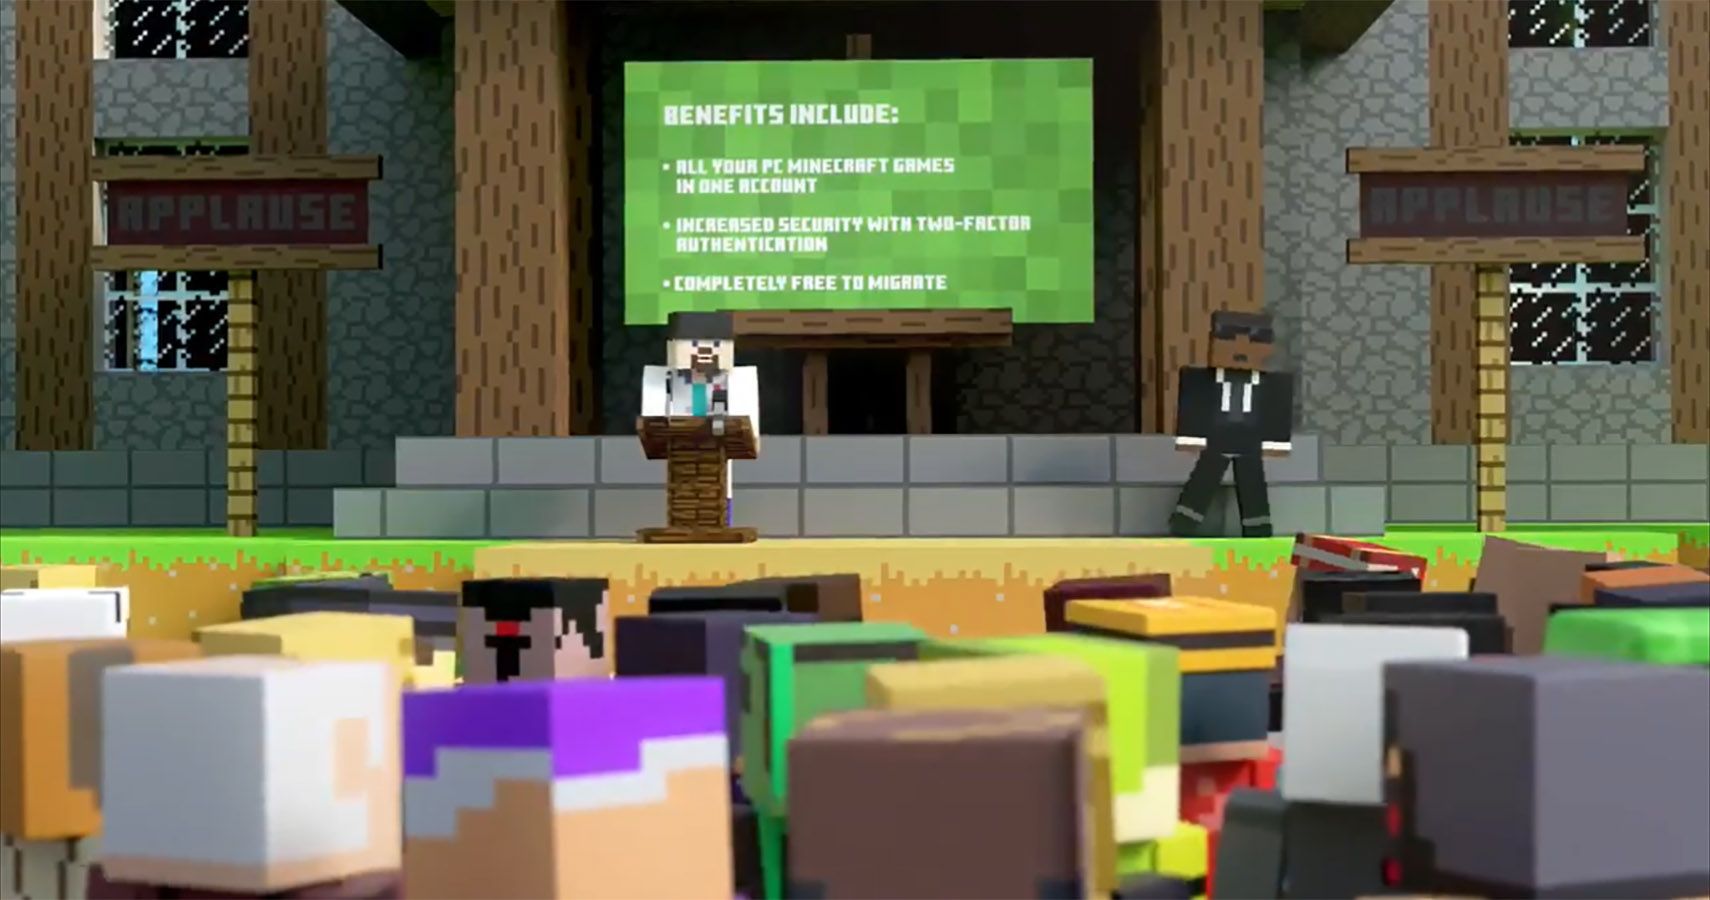 Minecraft Microsoft Account Requirement Announced by Mojang